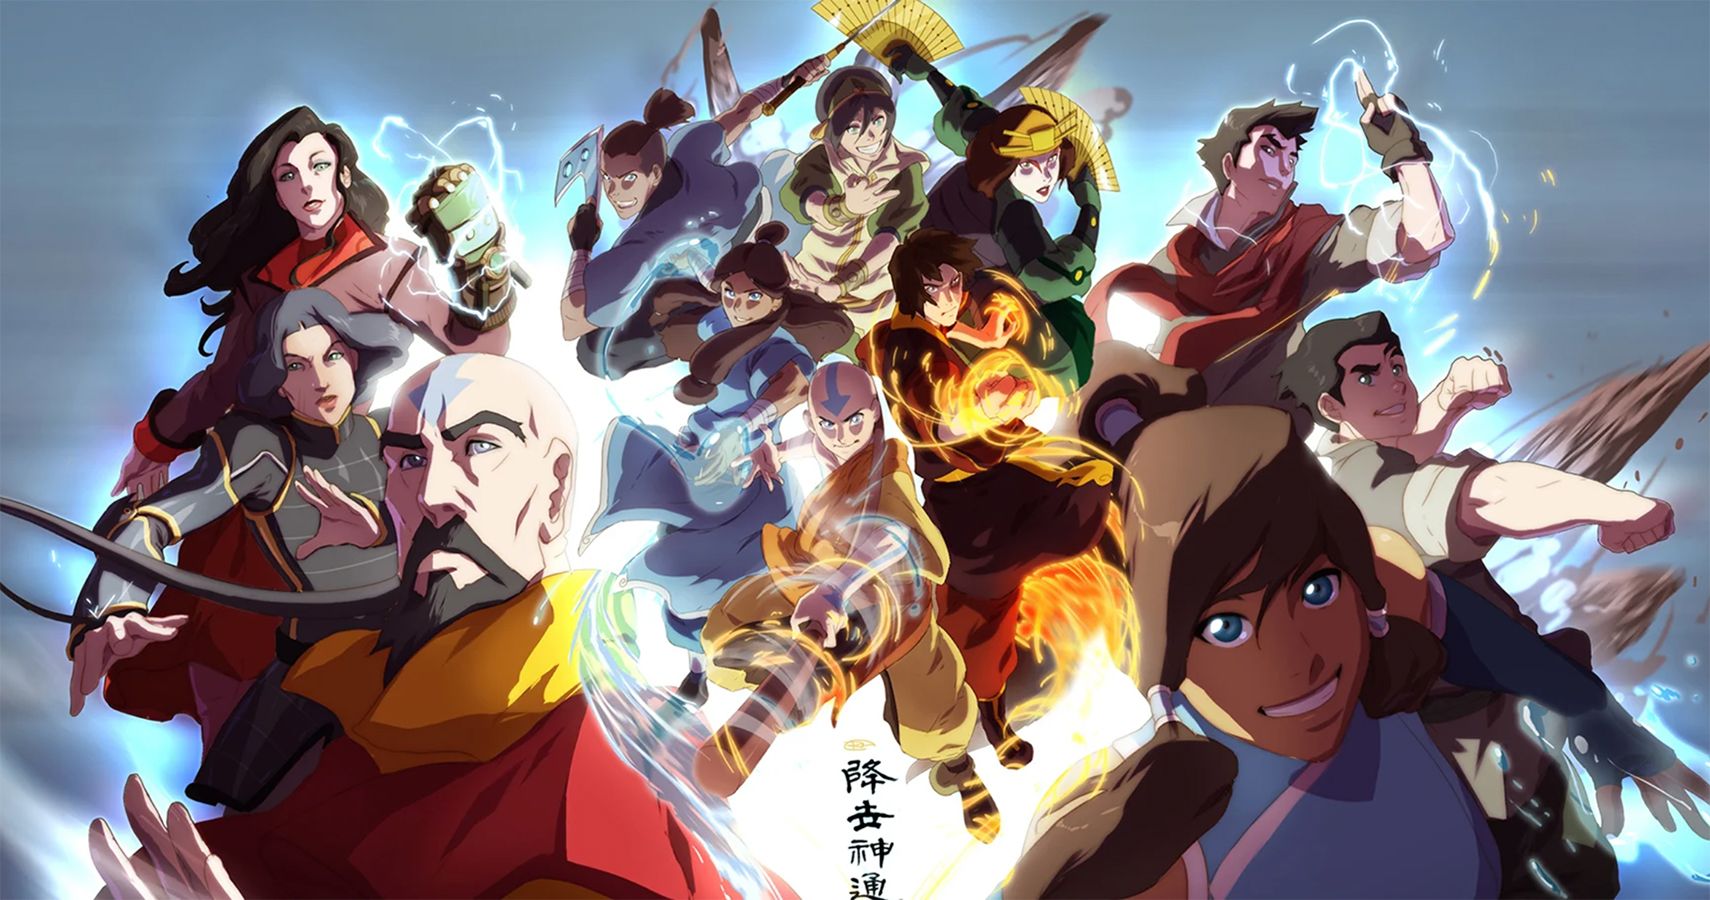 Avatar The Last Airbender Quest for Balance announced for Switch